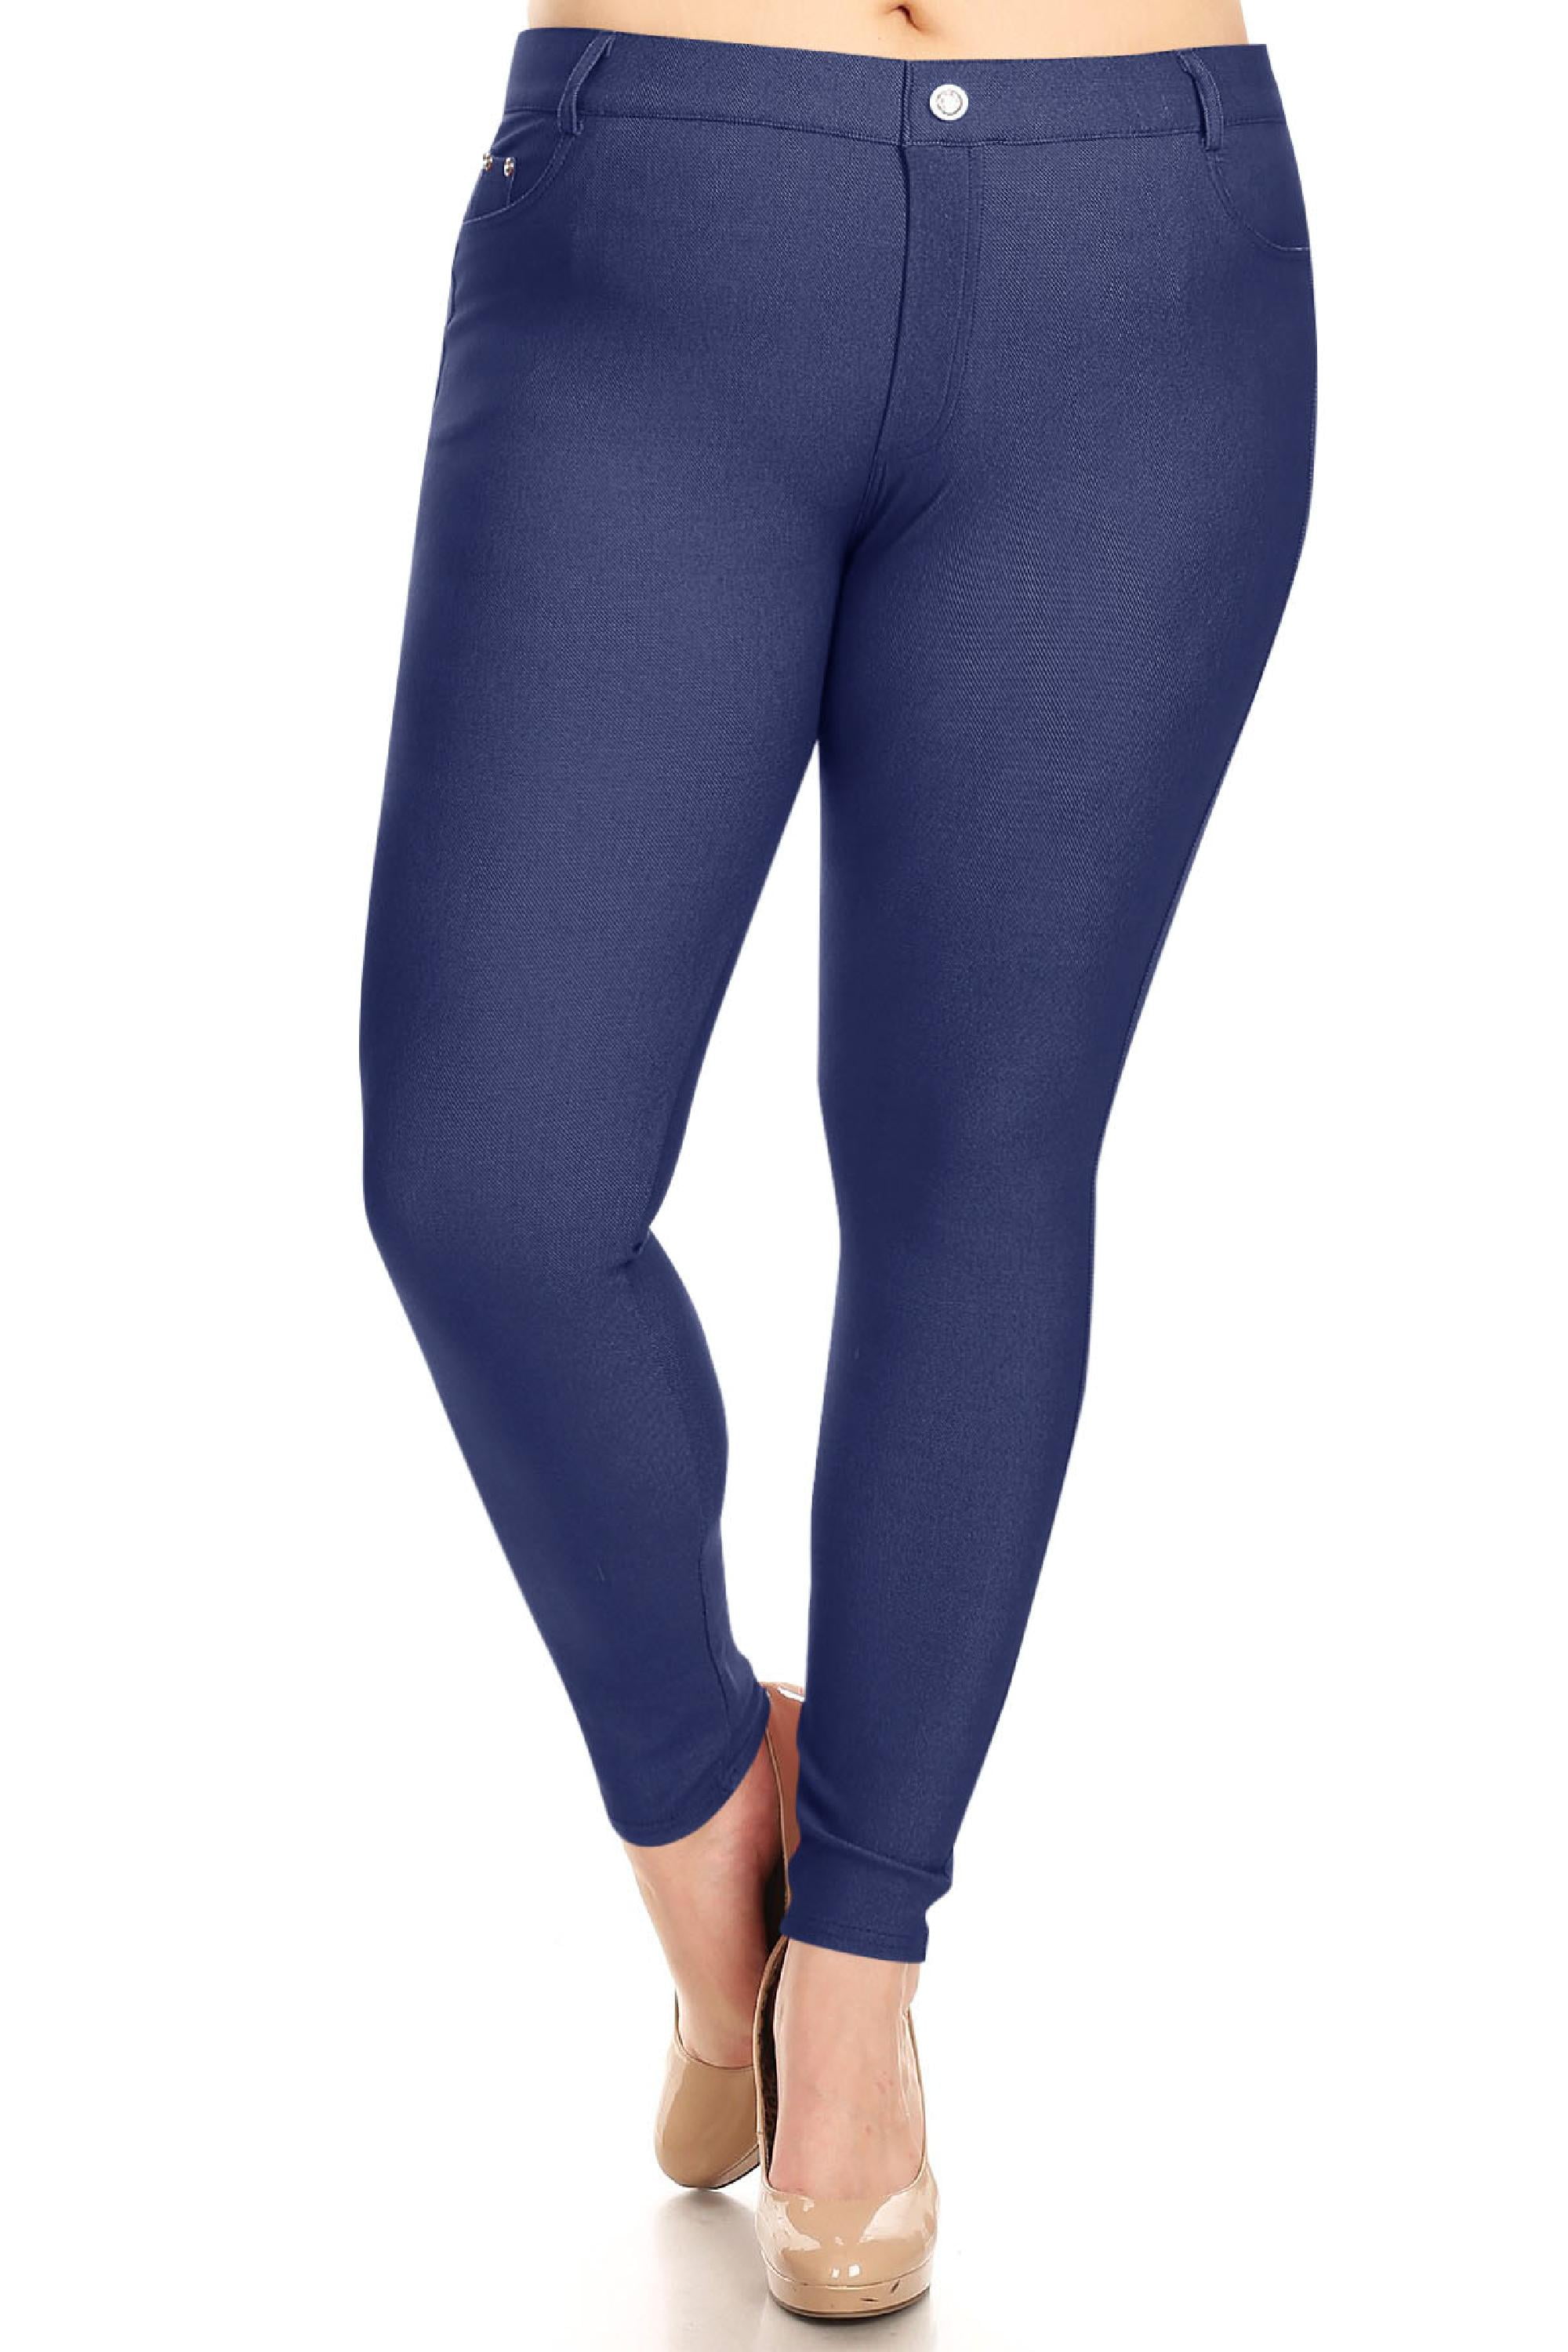 Women S Plus Size Stretch Casual Basic Pockets Button Solid Leggings